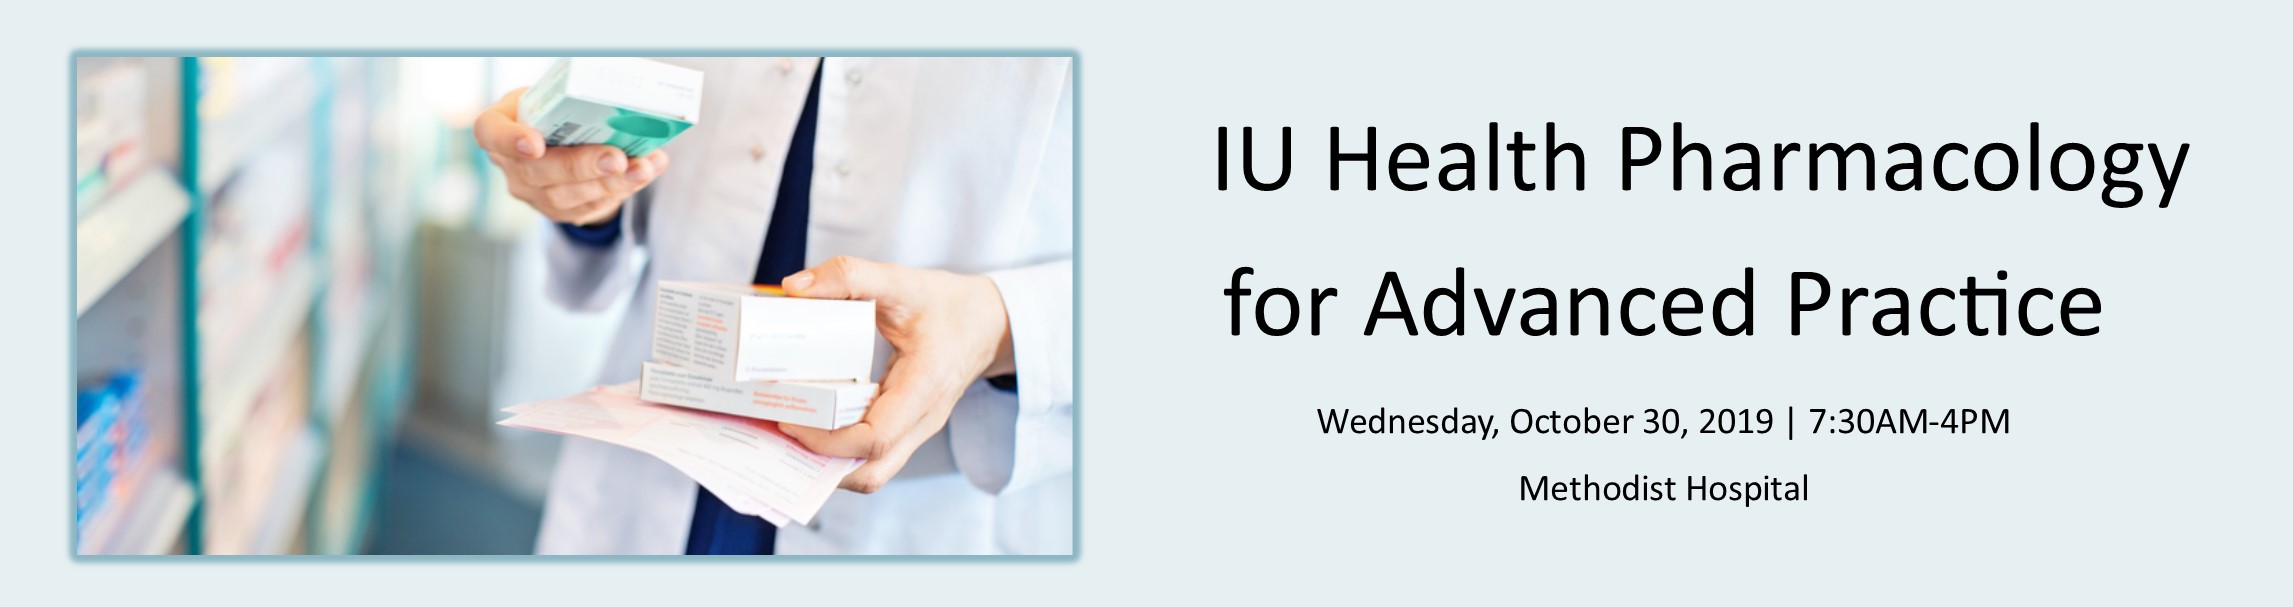 IU Health Pharmacology for Advanced Practice Providers Banner